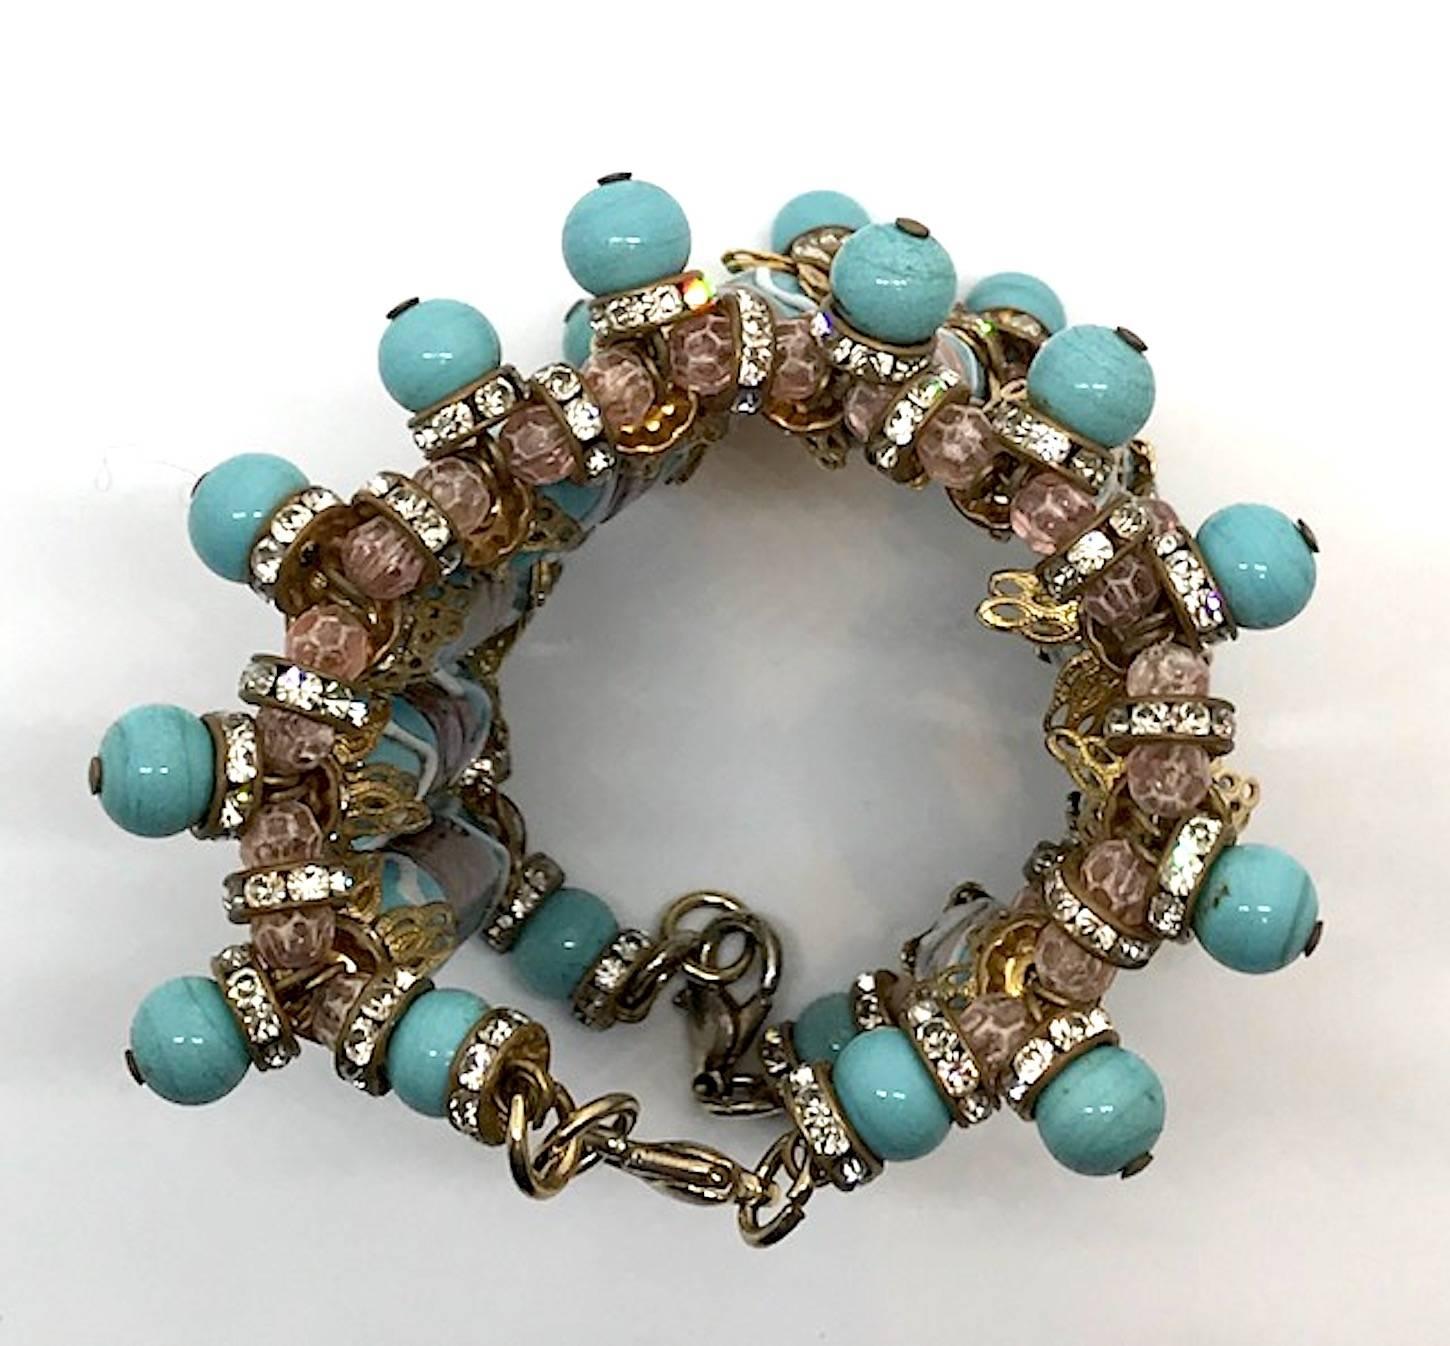 Venetian glass bead cuff from actress Elsa Martinelli's personal collection 2